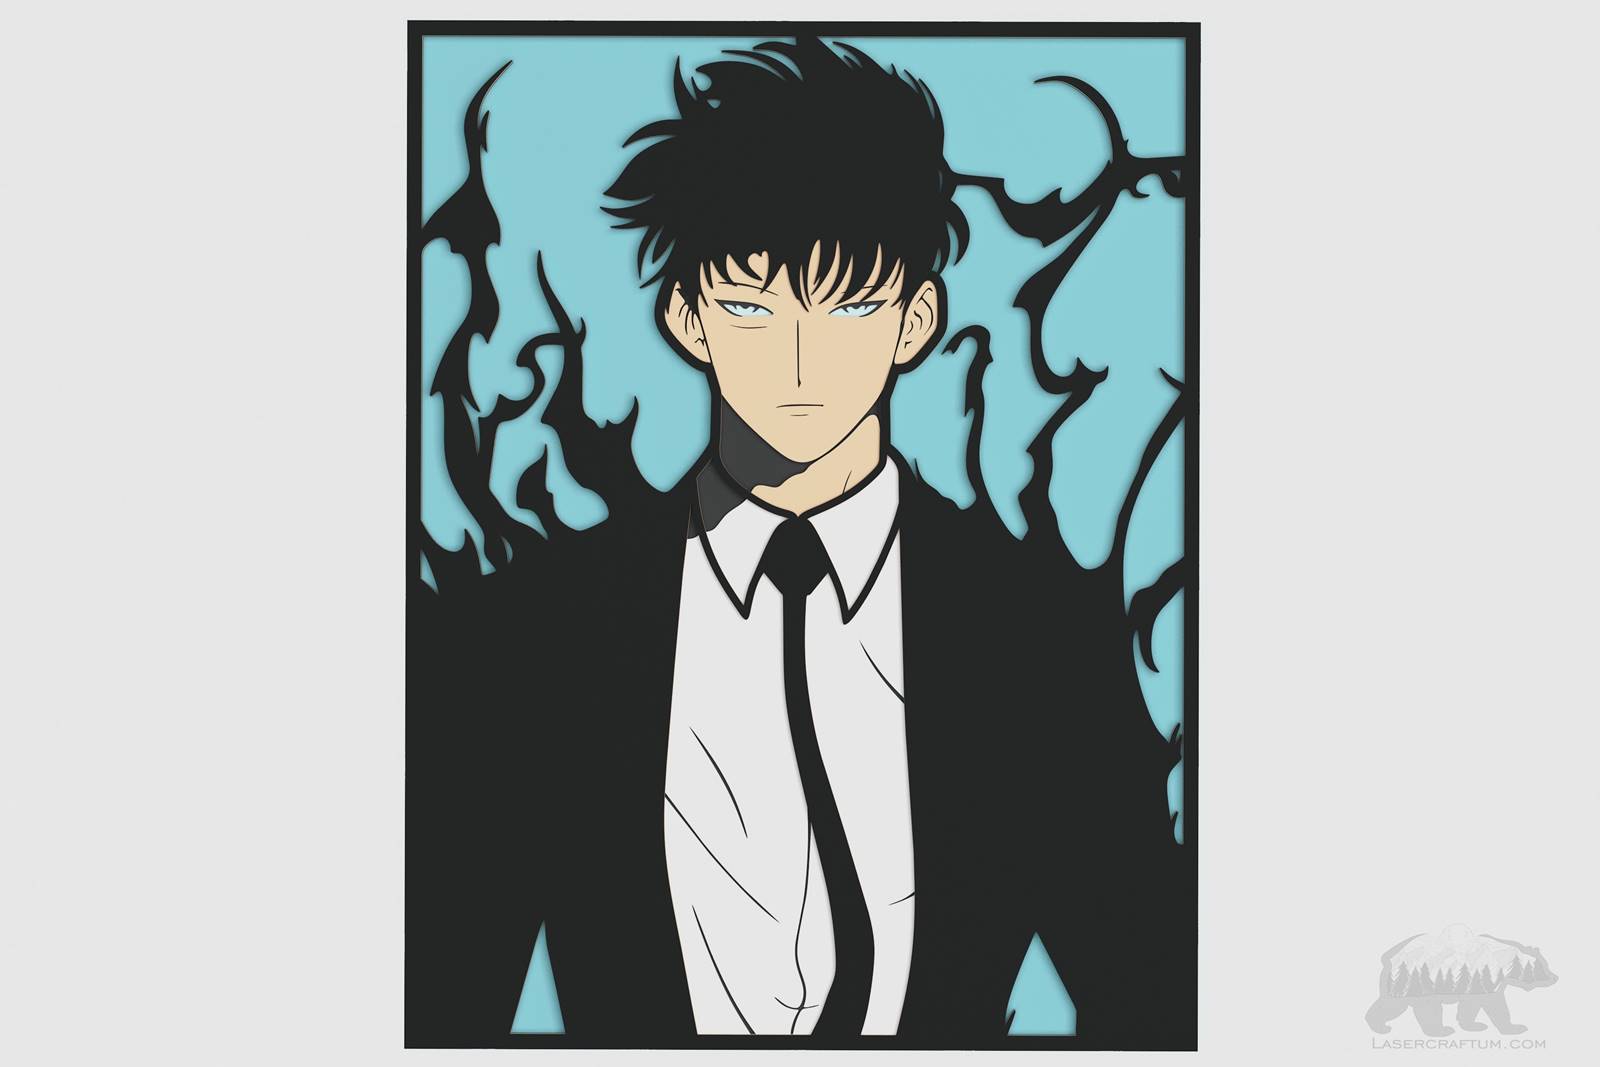 Sung Jin-Woo (Solo Leveling Anime) Layered Design for cutting